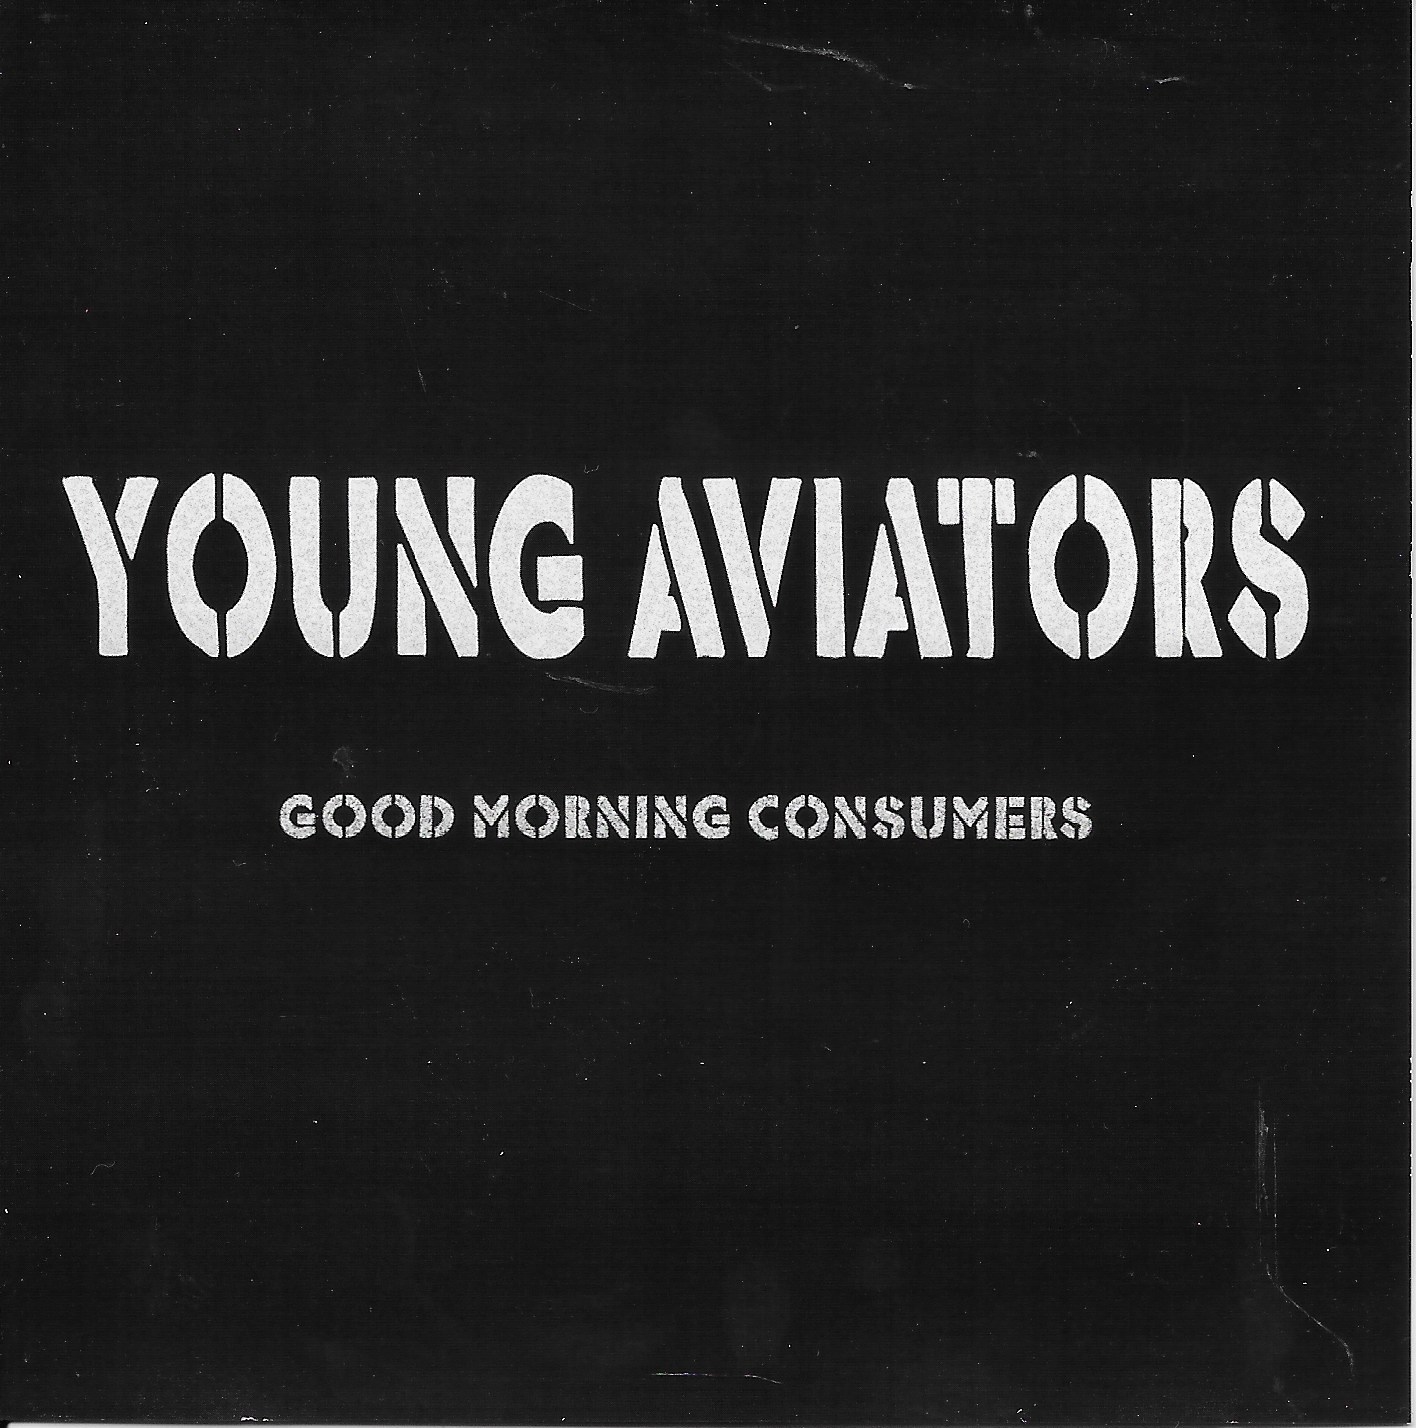 Picture of Good morning consumers by artist Young Aviators 